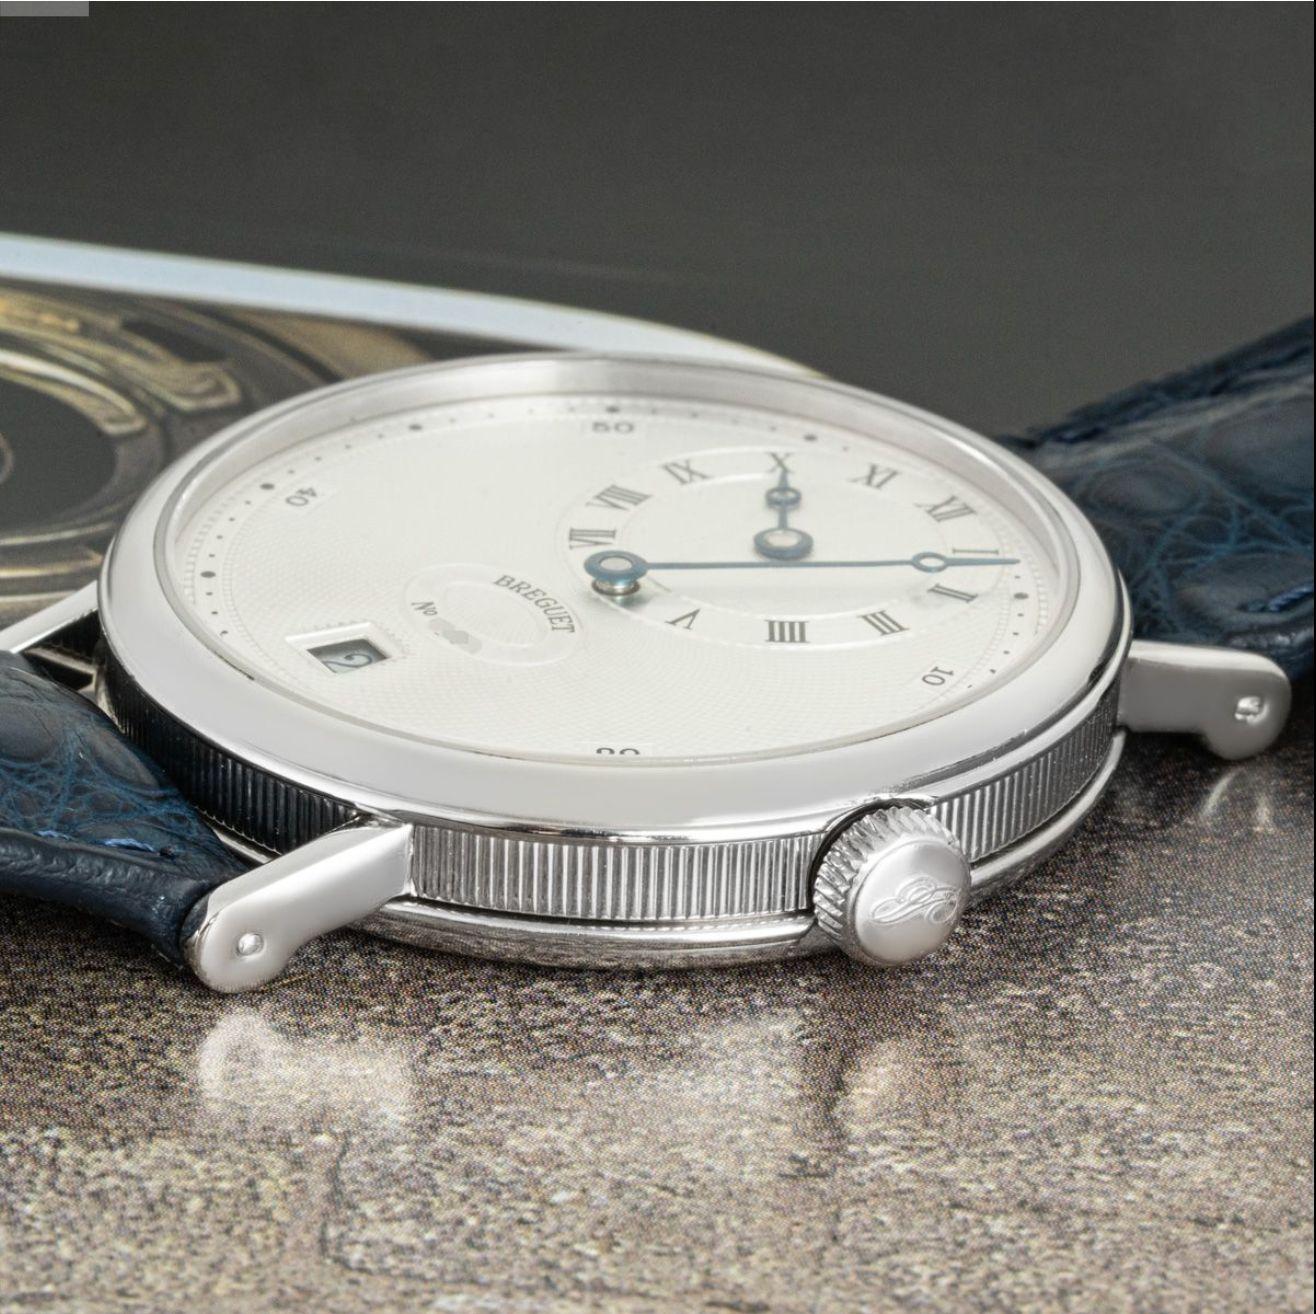 A platinum crafted Classique by Breguet. Featuring a silver guilloche dial with an off-centre dial with roman numerals indicating the hour. The watch also features a date aperture, blued steeled hands and a platinum bezel.

Fitted with a sapphire